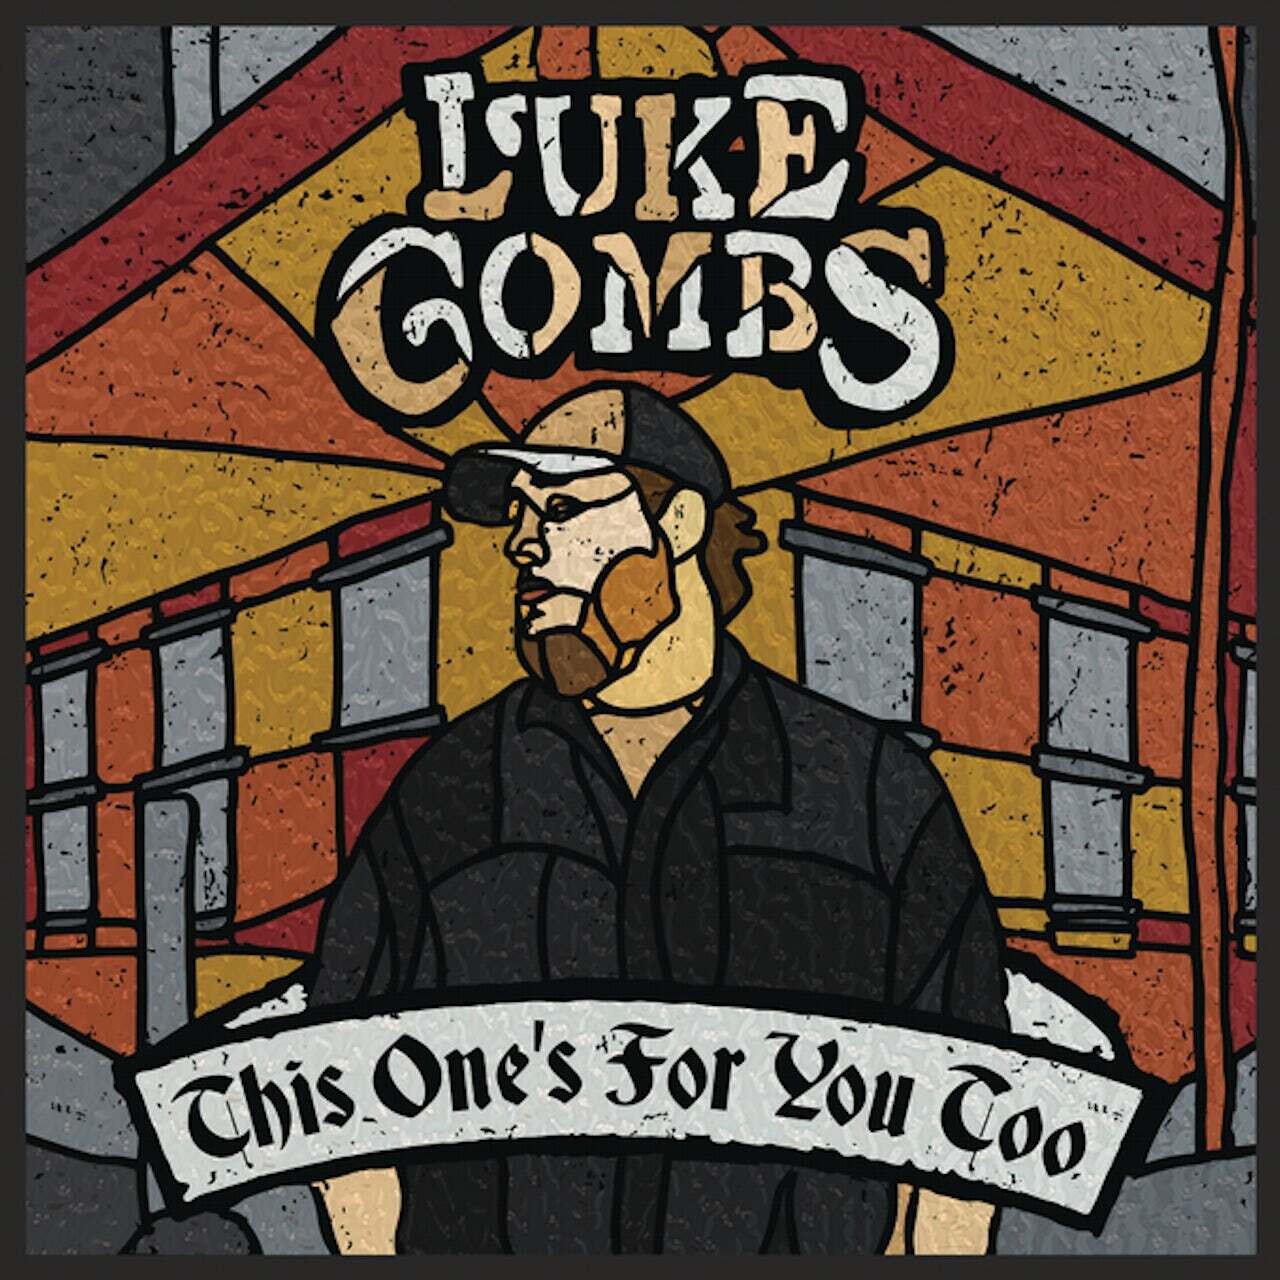 Luke Combs / This One's For You Too